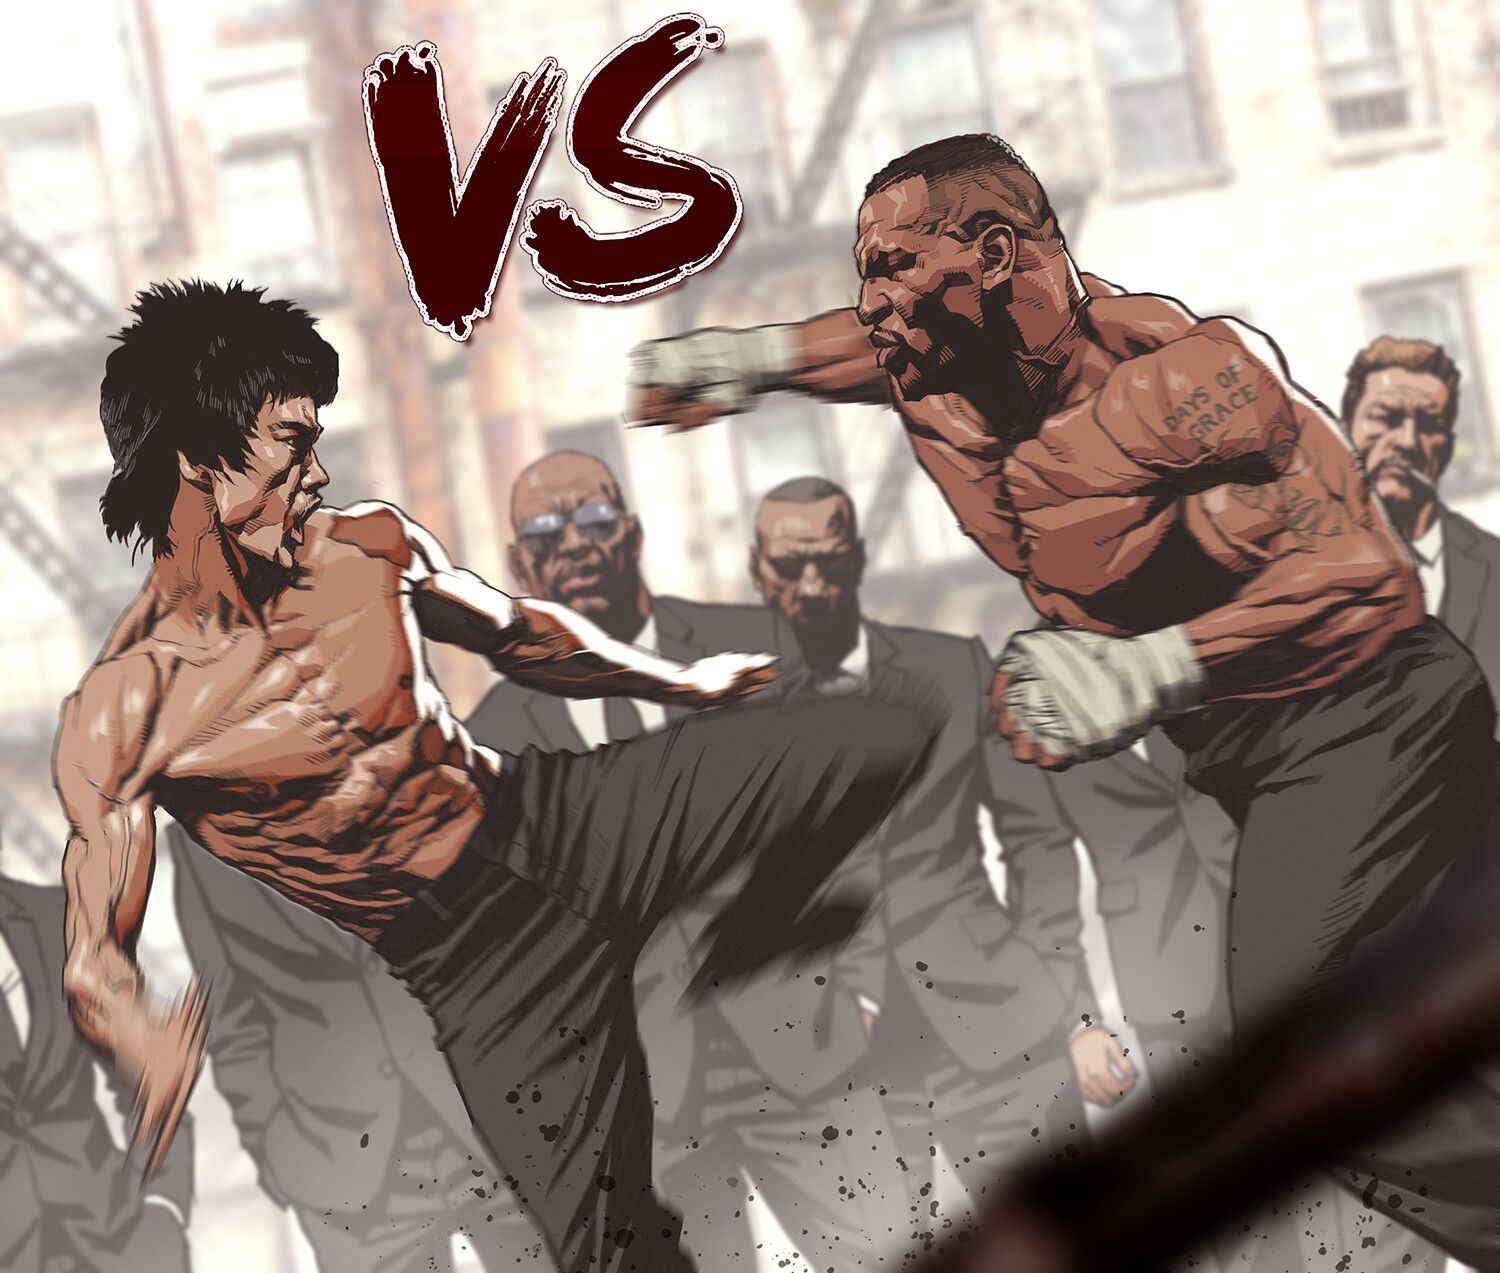 Bruce Lee and Mike Tyson both shirtless in an alleyway Bruce kicking and Mike punching in comic book style fan art